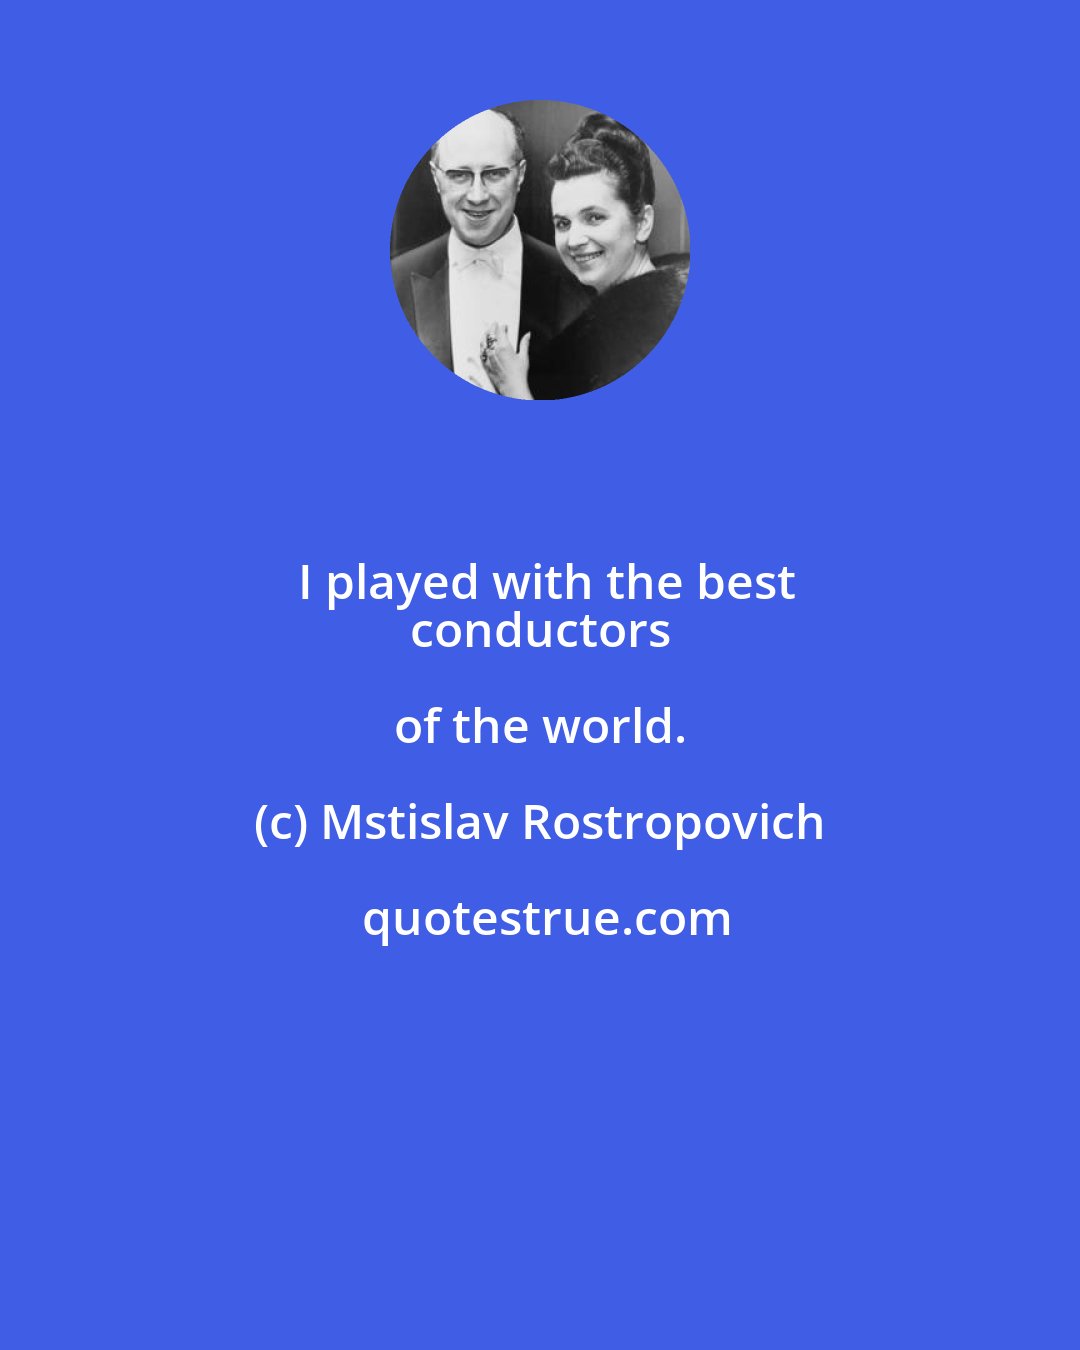 Mstislav Rostropovich: I played with the best
 conductors of the world.